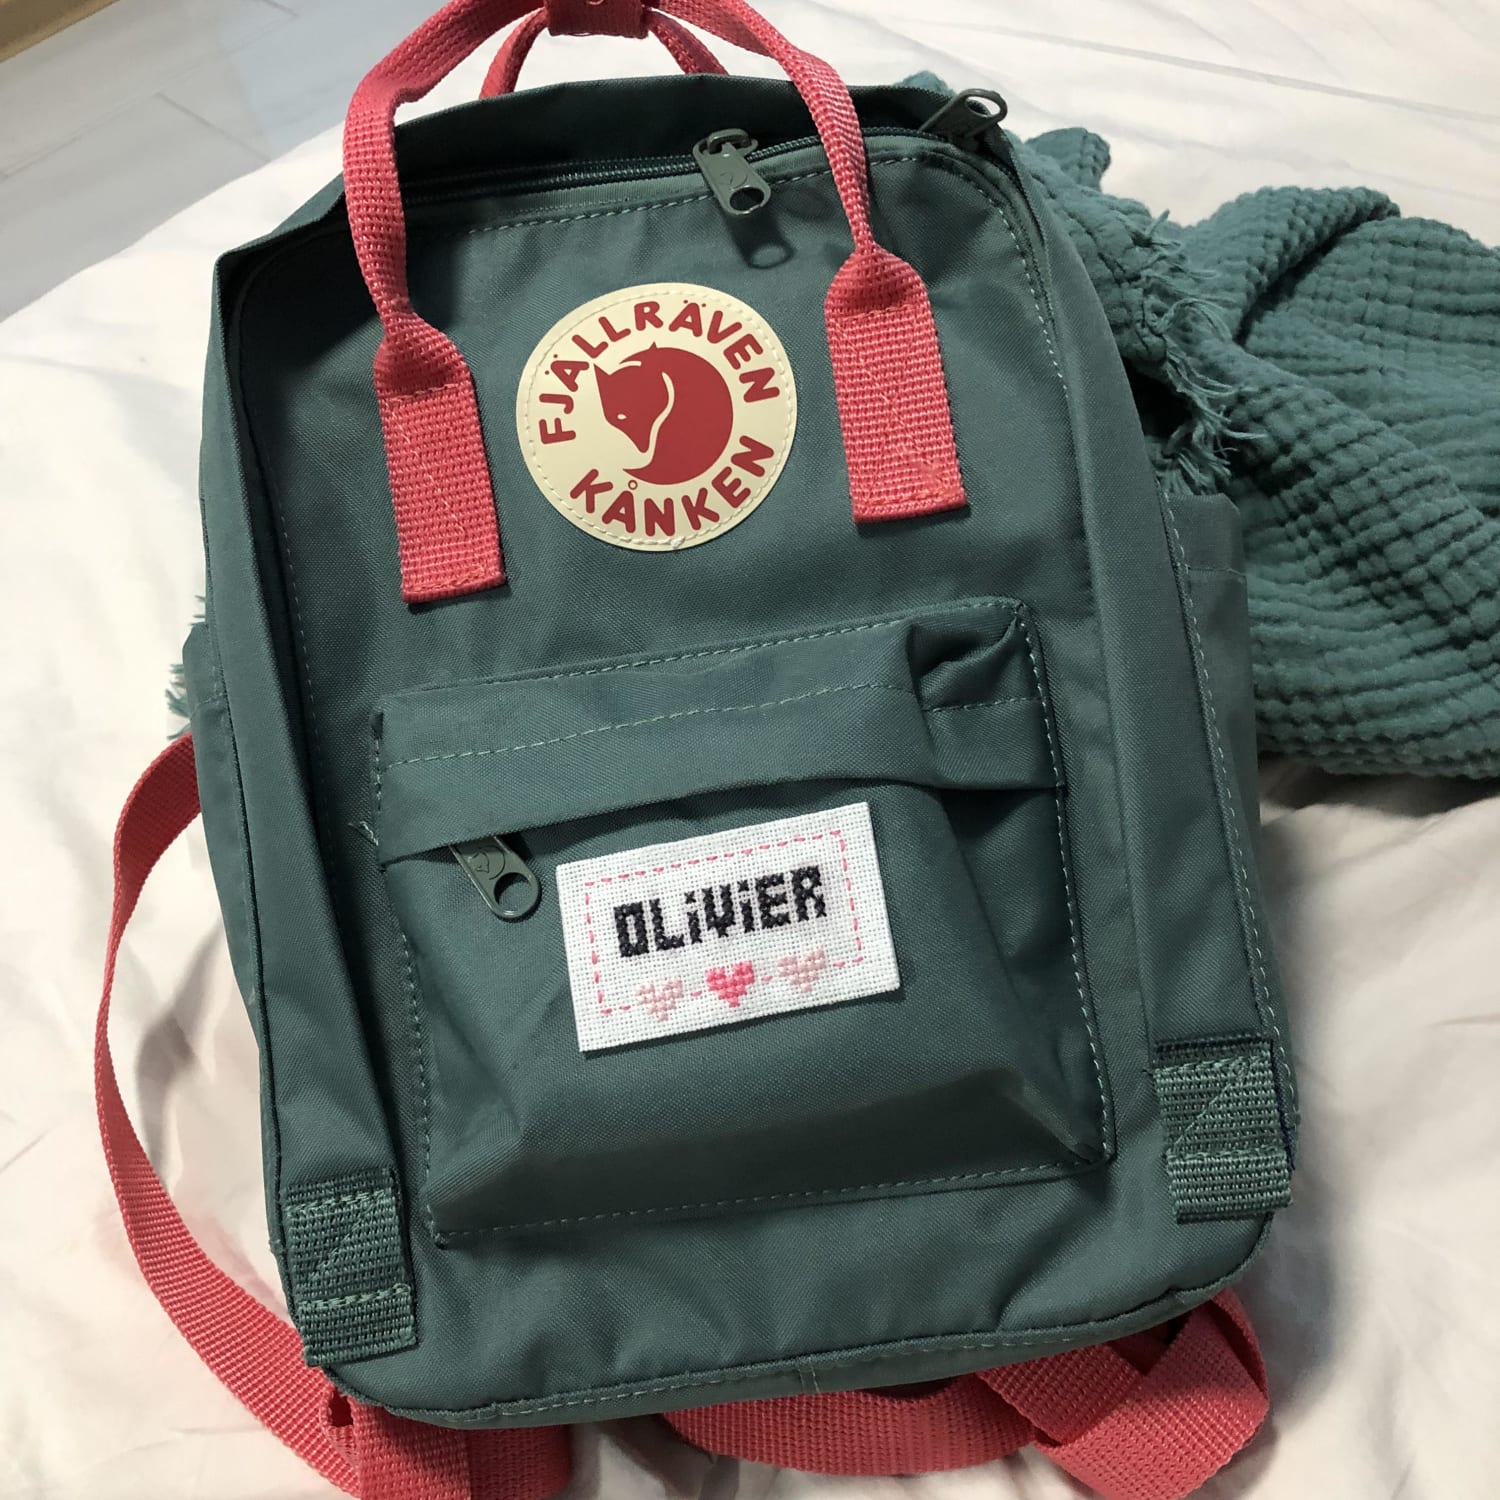 [FO] A little self drafted name tag for my kid’s kanken mini school bag. It was a pain to sew on but the result was worth it.